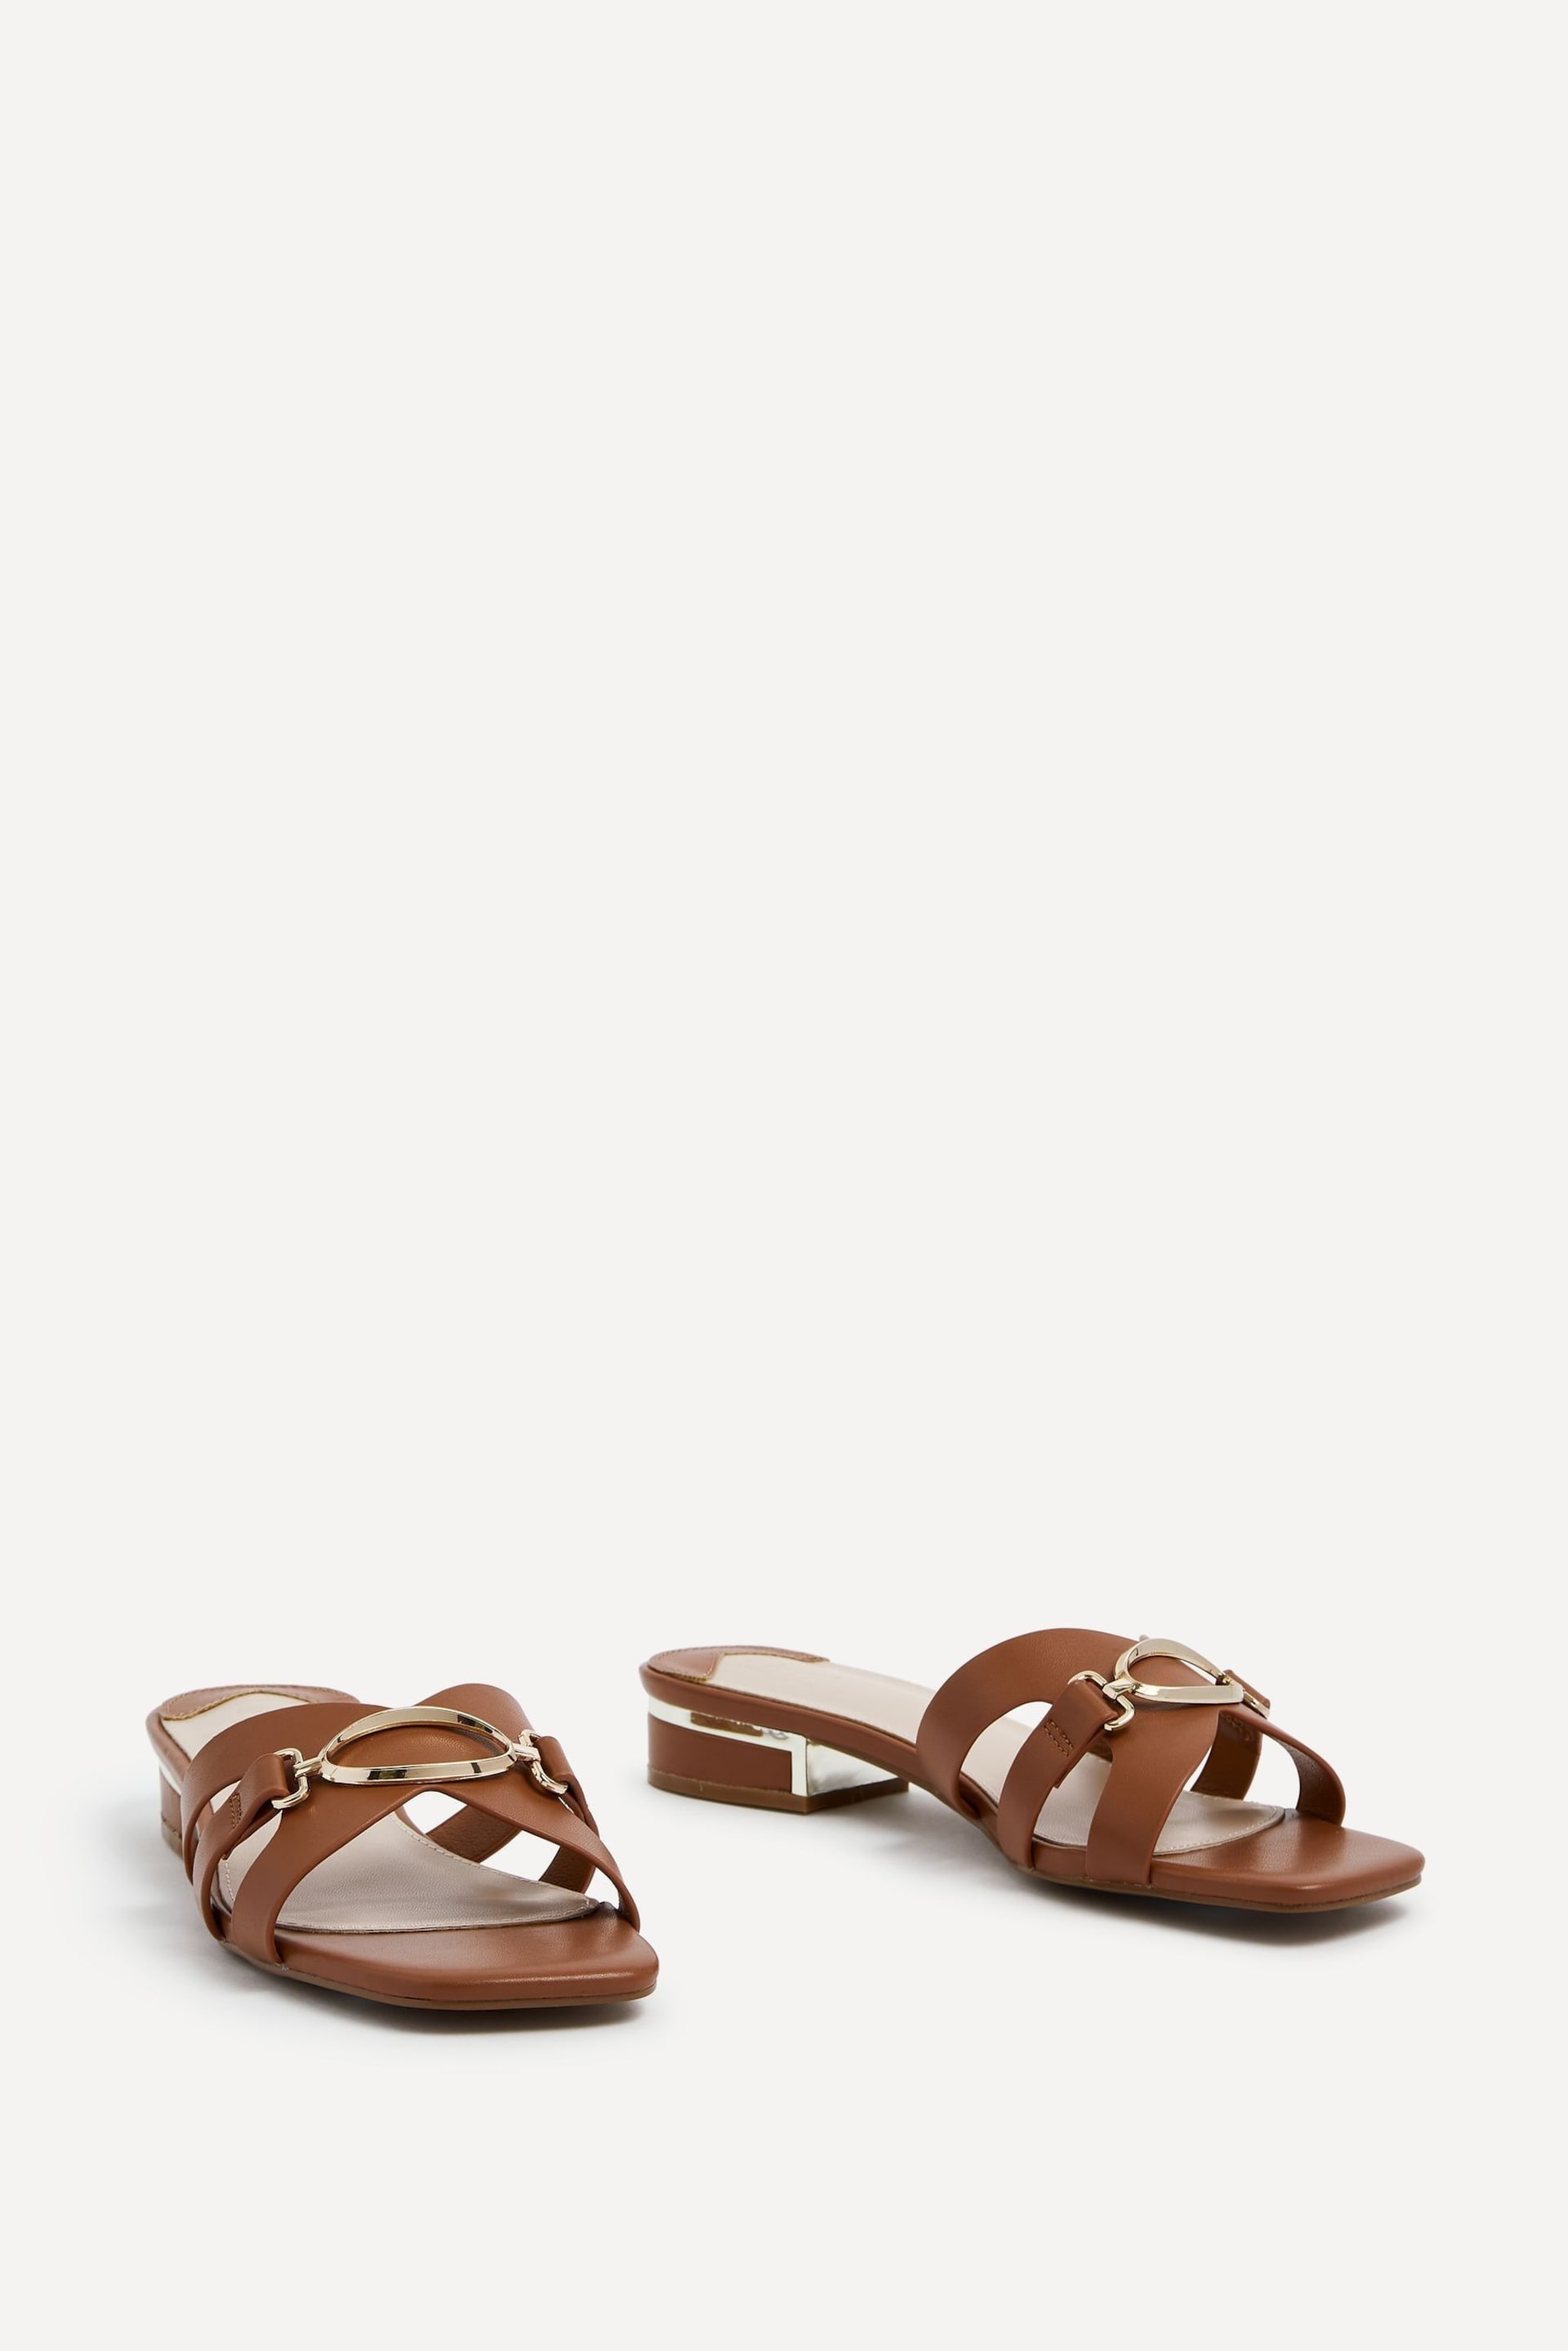 Linzi Brown Gallery Low Heeled Sandals With Gold Trim - Image 3 of 5